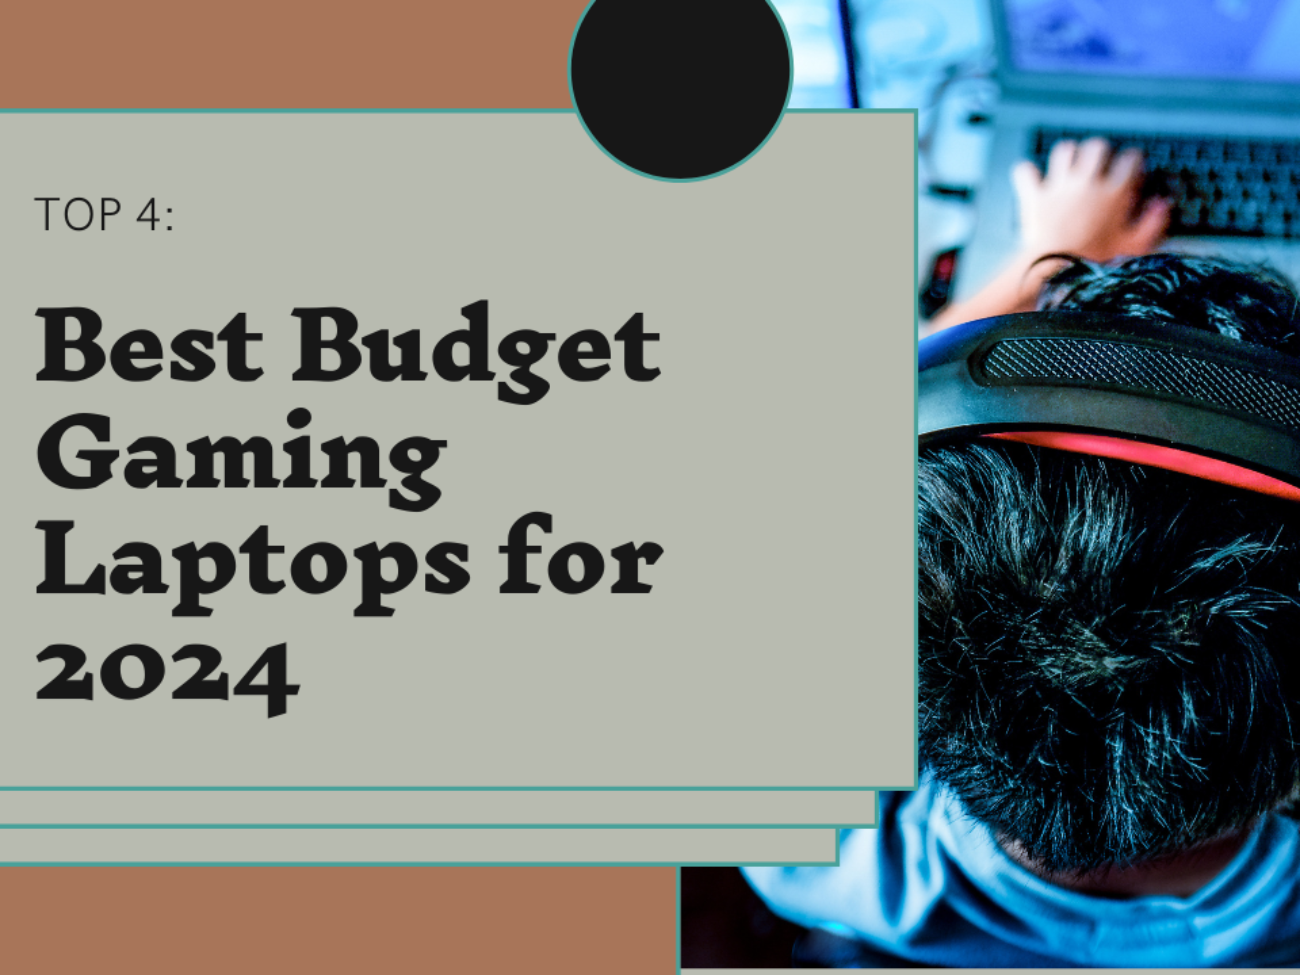 TOP 4 Best Budget Gaming Laptops 2024